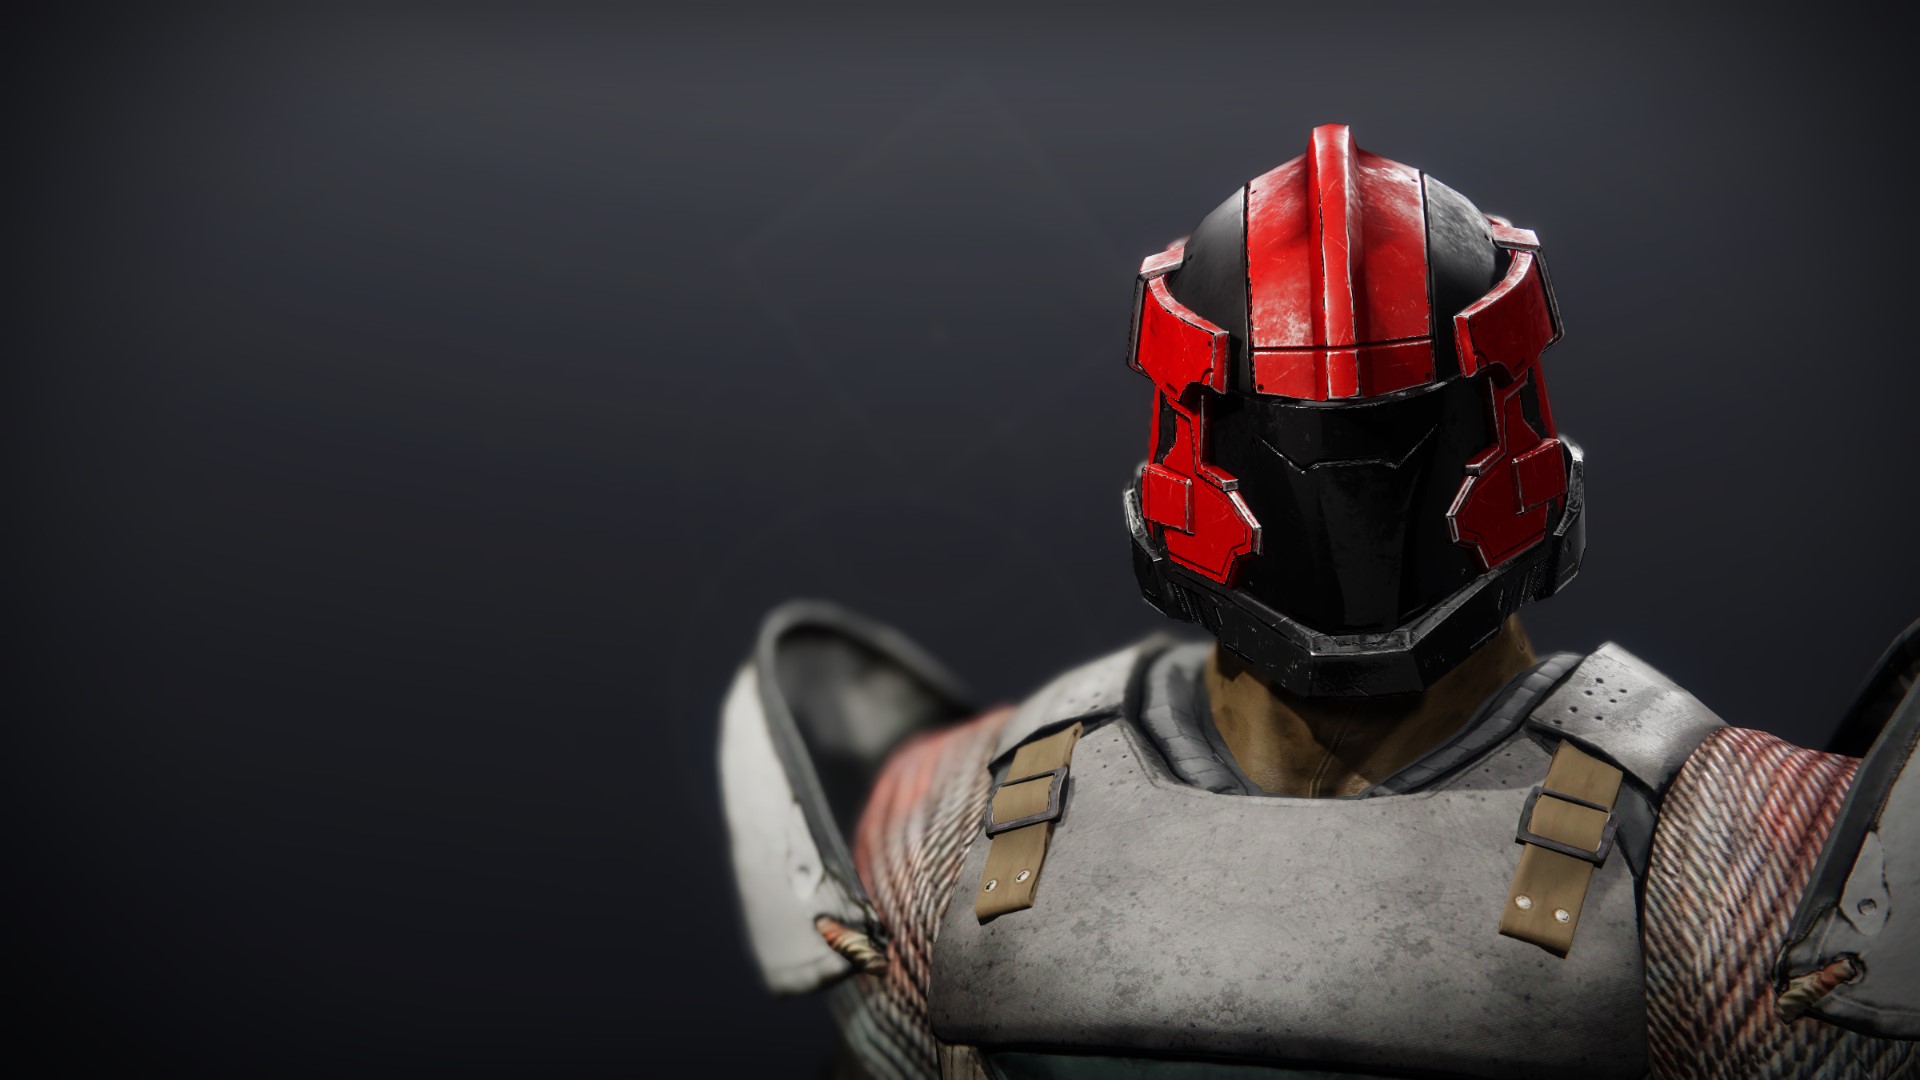 An in-game render of the Cinder Pinion Helm.